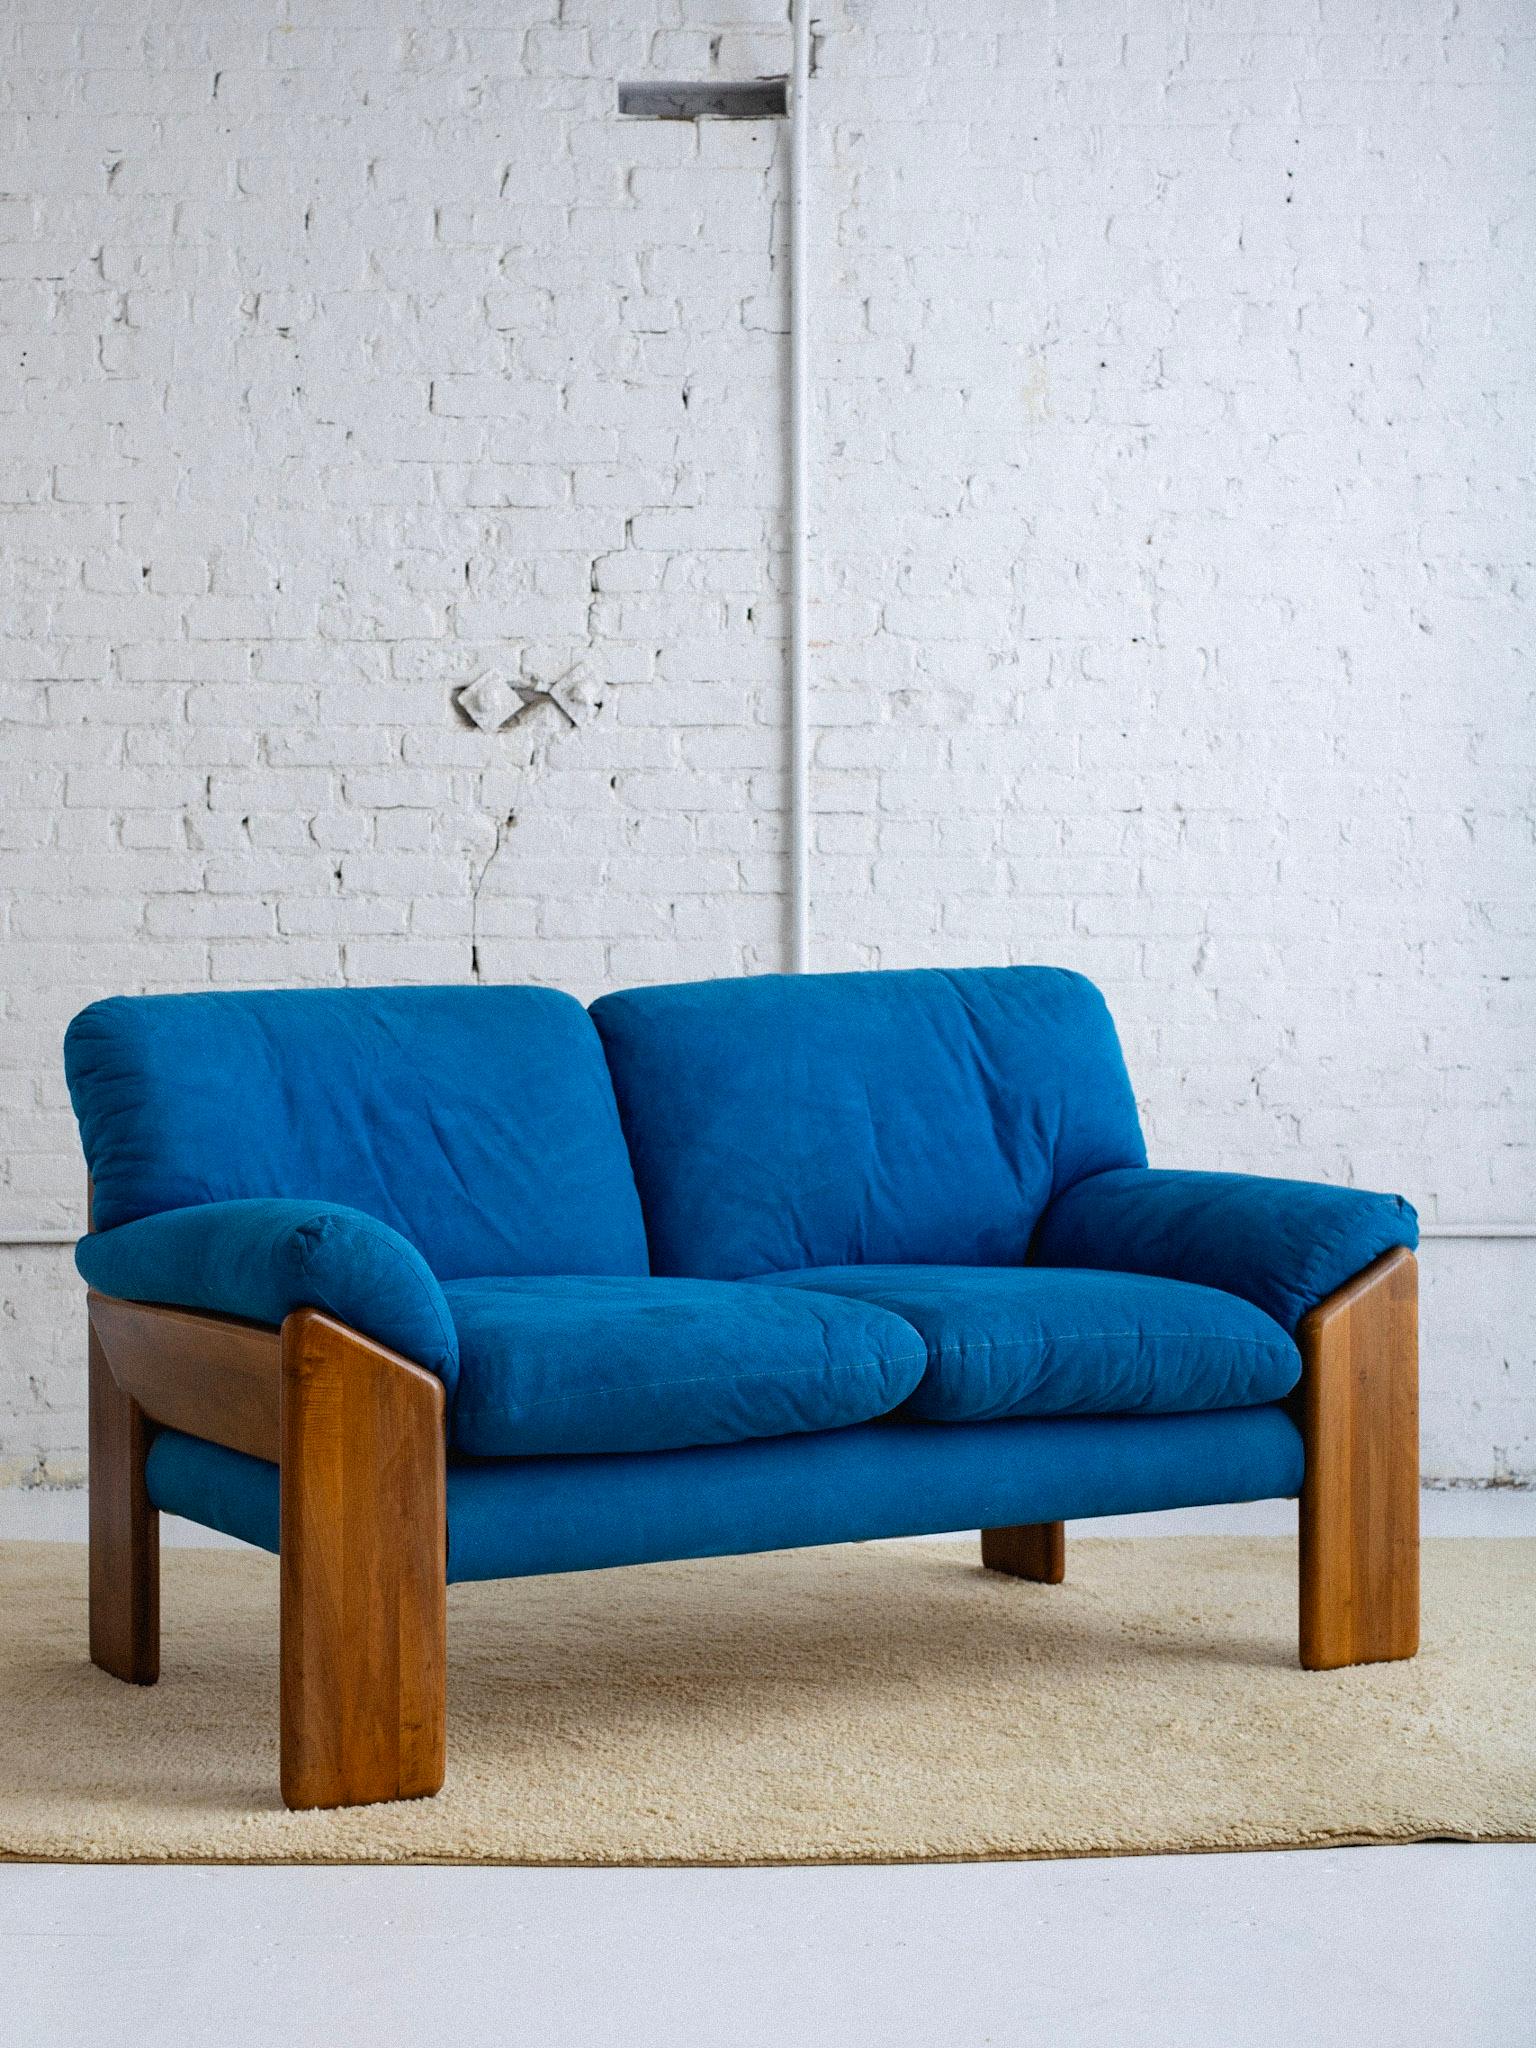 A 'Sapporo' two seat sofa designed by Mario Marenco for Mobil Girgi. A solid wood frame holds six removable cushions. Cobalt blue ultra suede upholstery. Reupholstery recommended. Stamped “Mobil Girgi.” Sourced in Northern Italy. Three seat sofa and